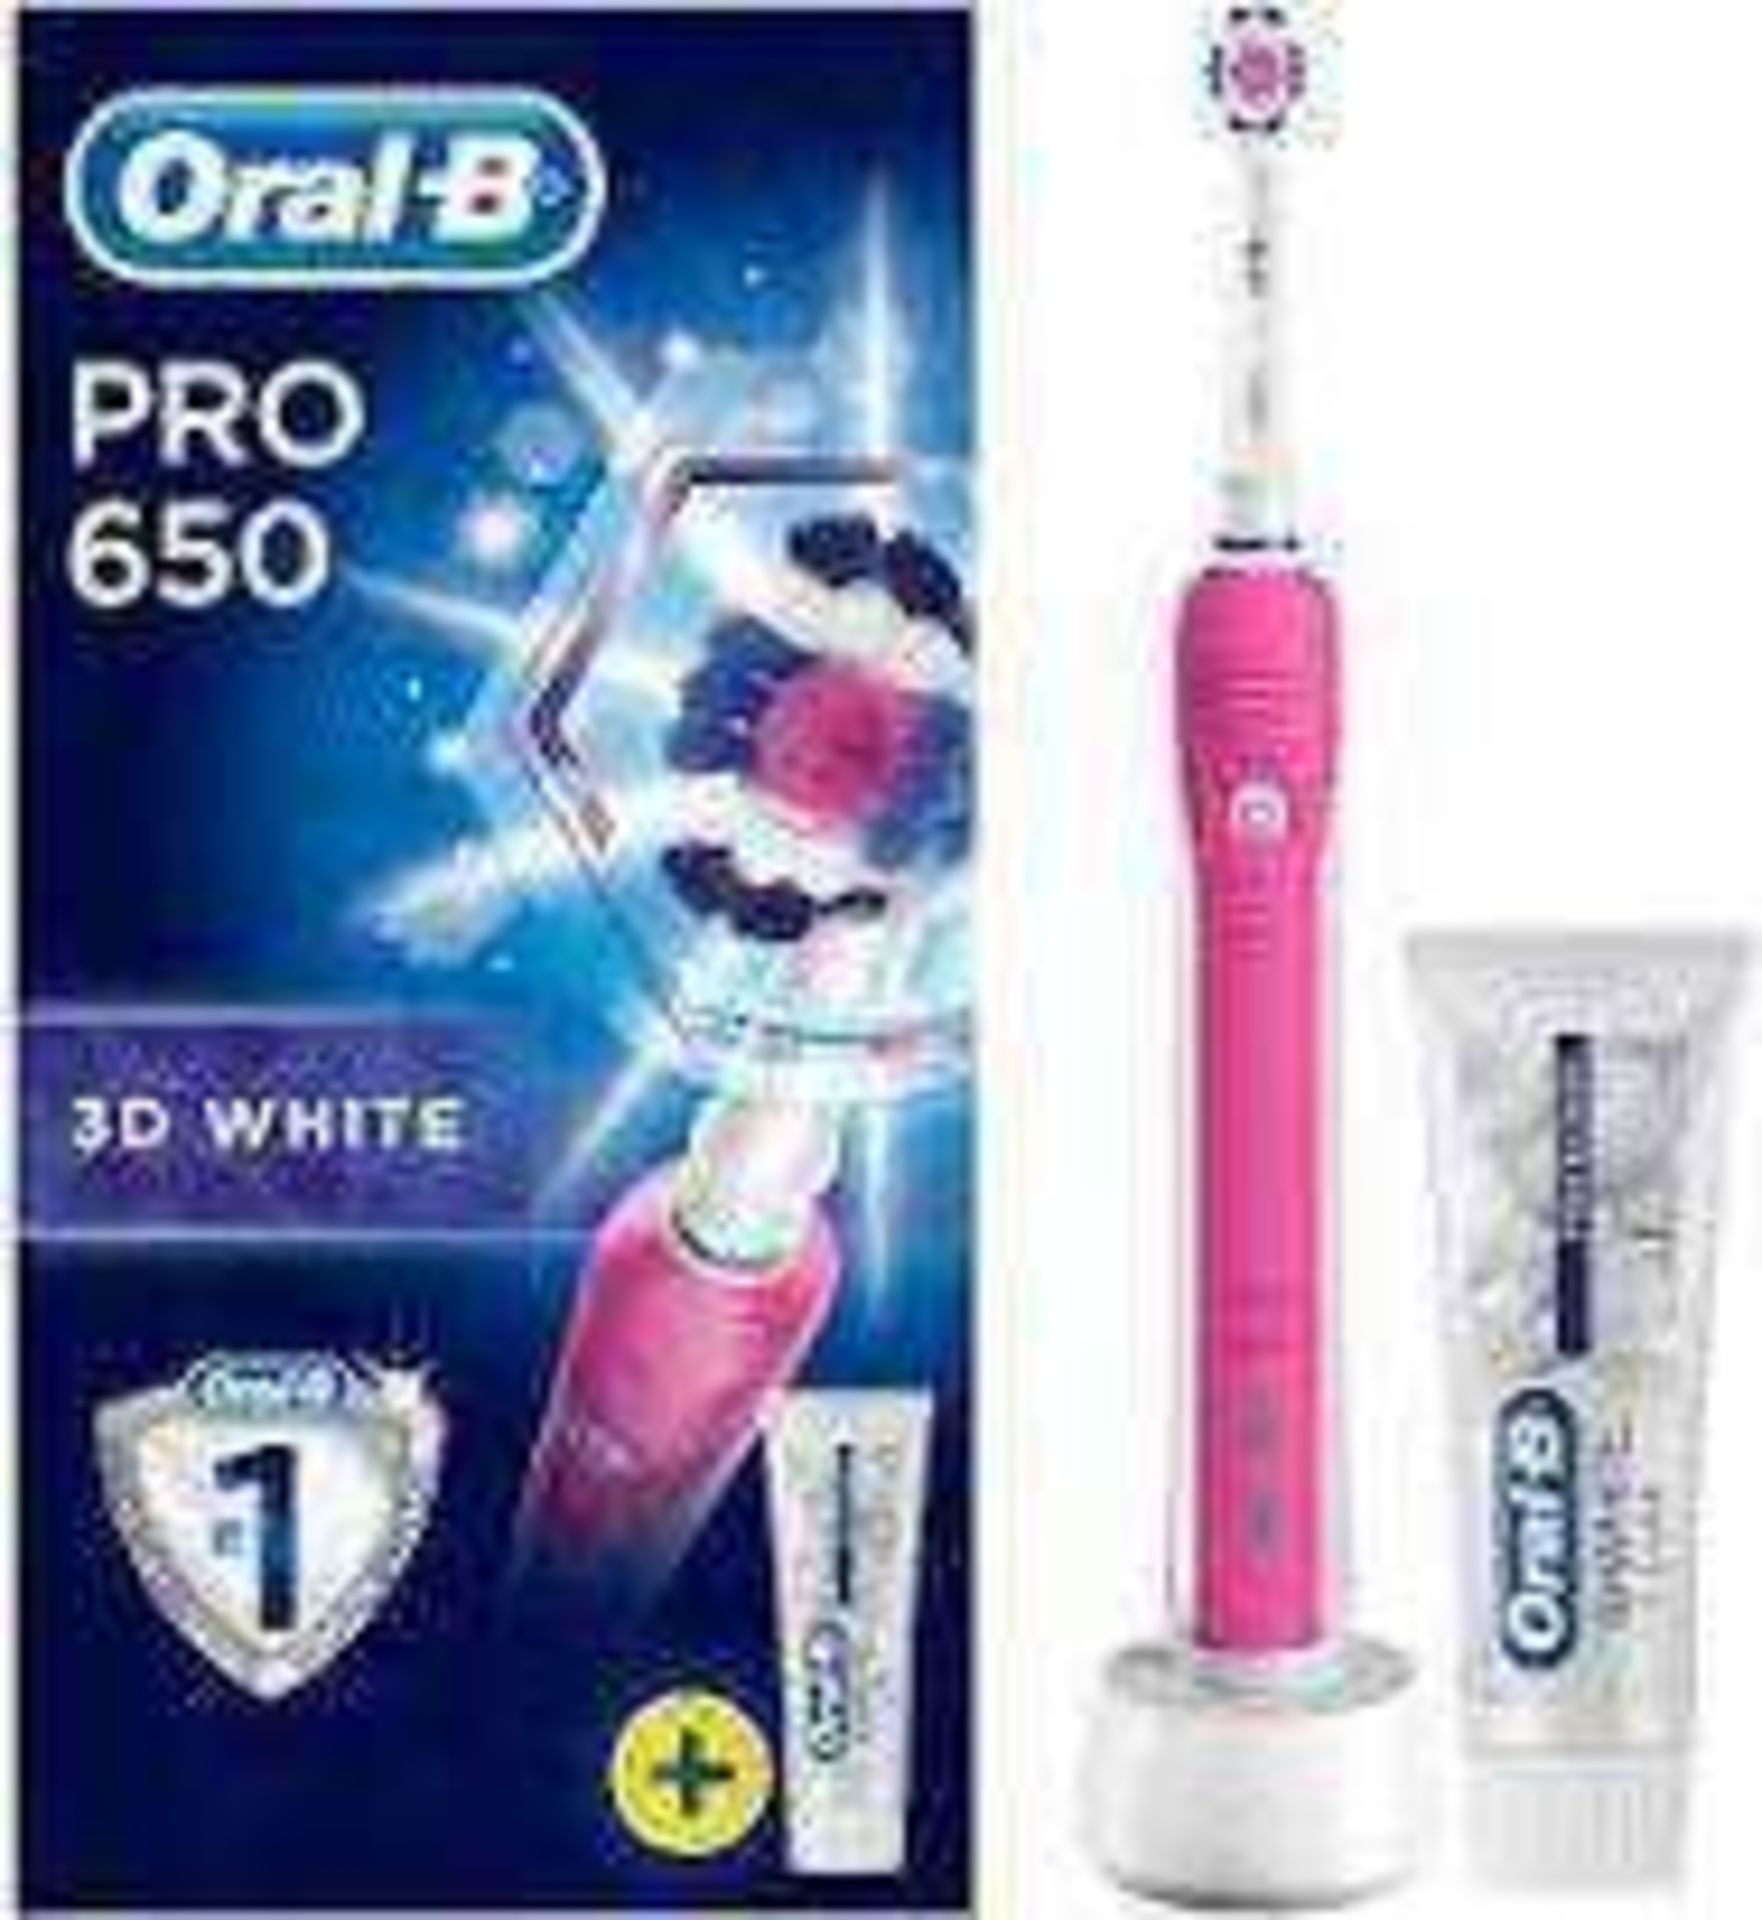 RRP £160 Lot To Contain A Braun Oral-B Pro 650 3D Action Toothbrush And A Toni & Guy Illusions 2 Lim